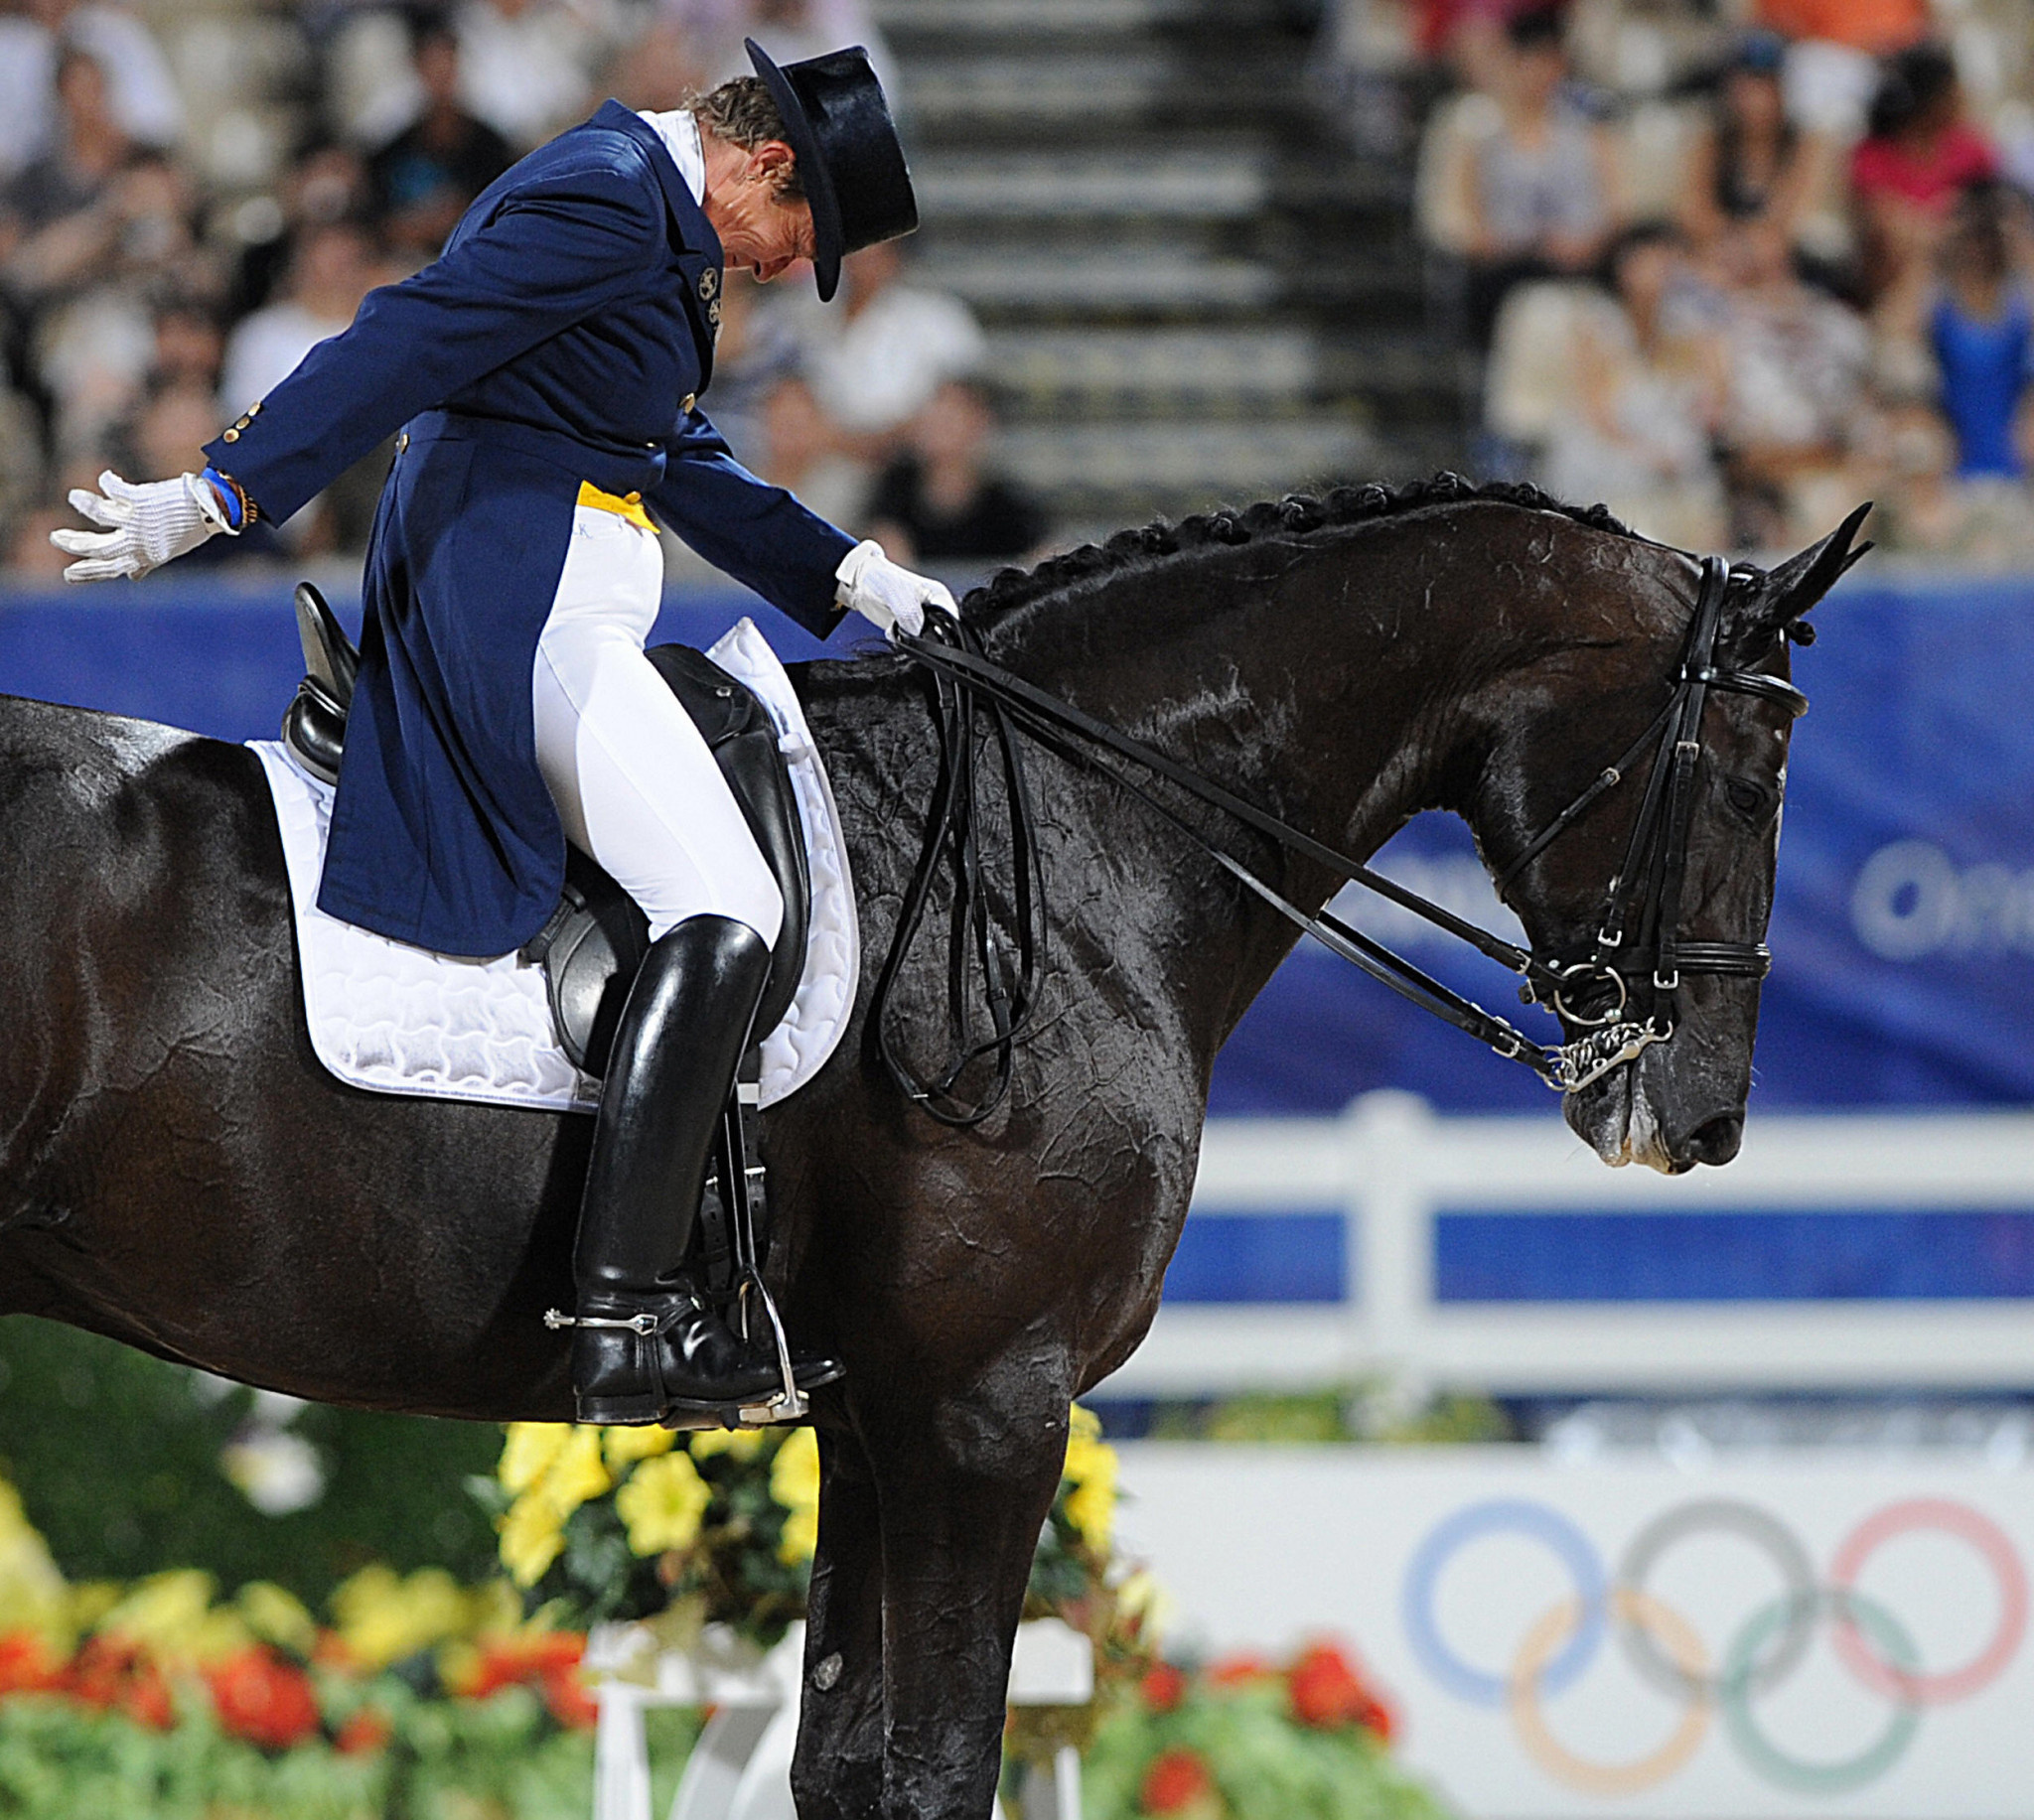 Dressage: Rider - Emile Faurie, Relatively young horse competing at Olympics, Top hats during competition. 2050x1840 HD Background.